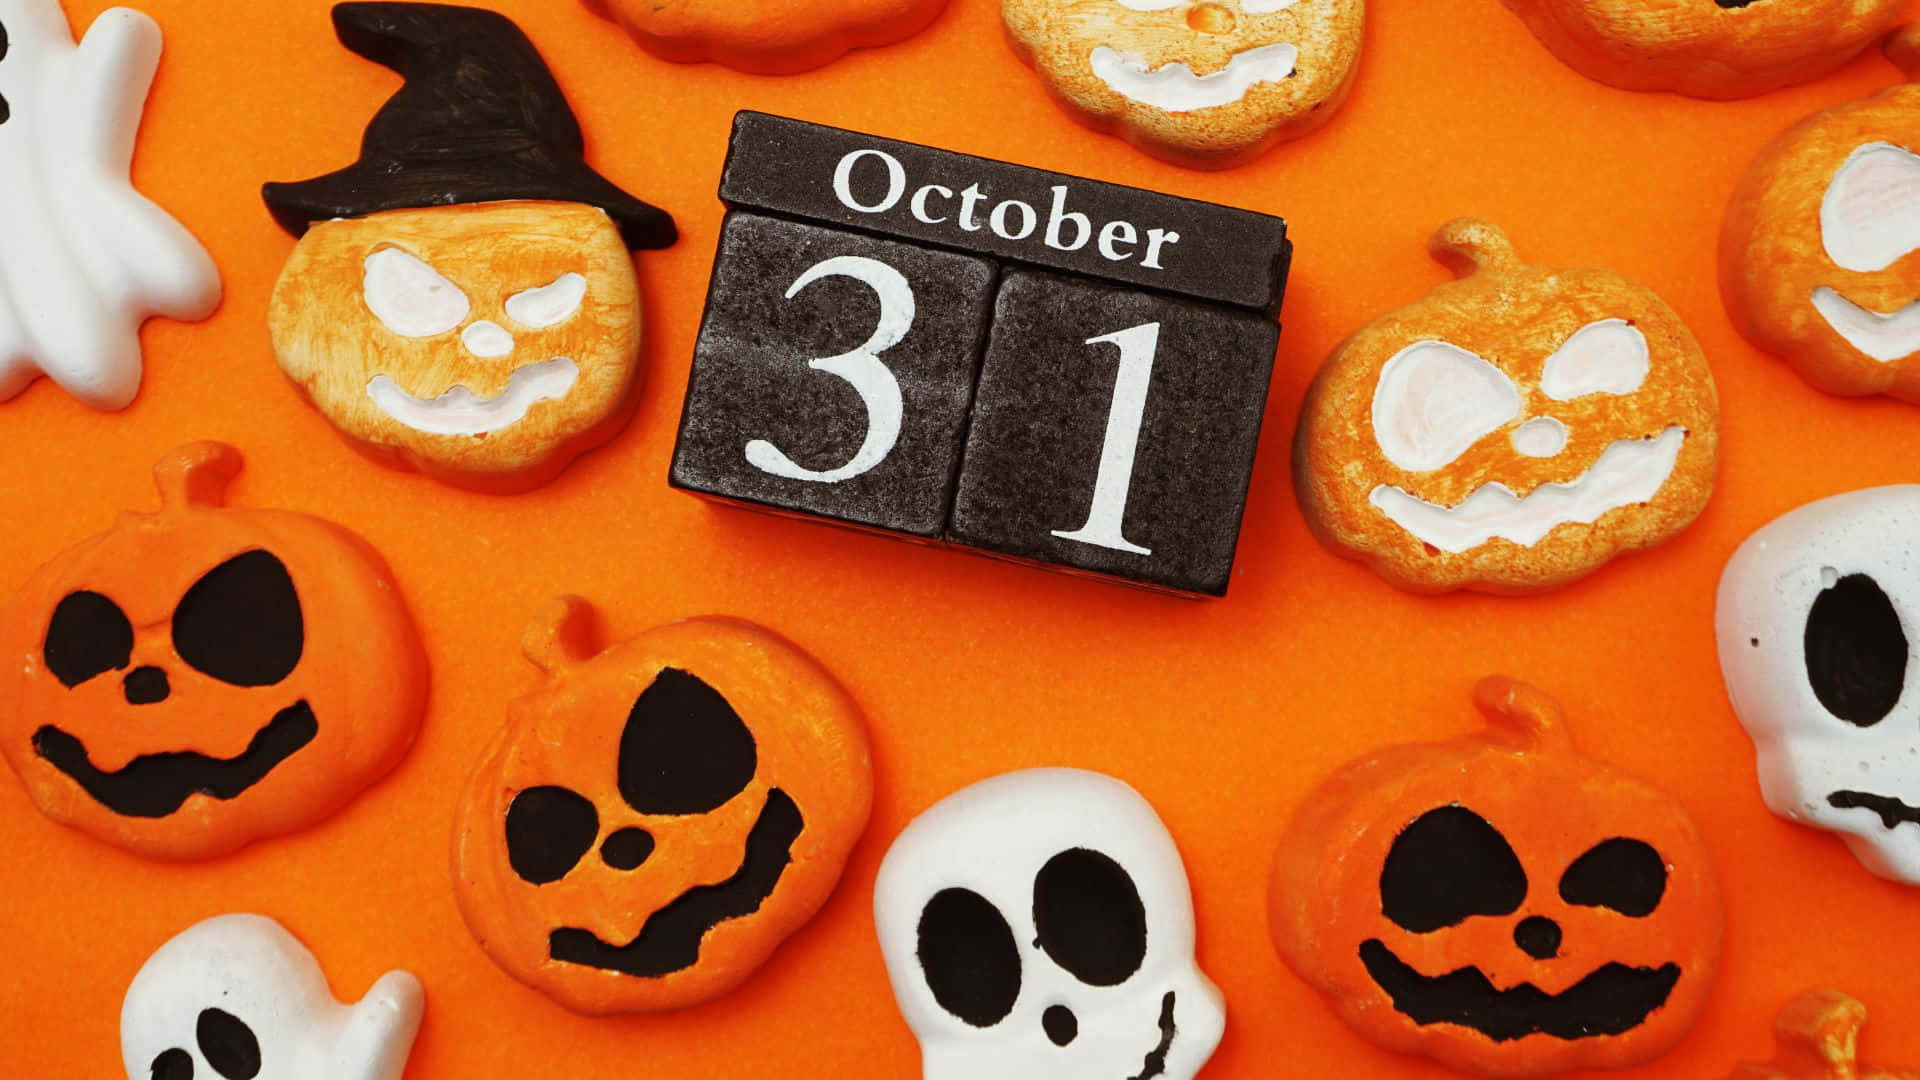 Celebrate October 31st with Fun and Fright! Wallpaper